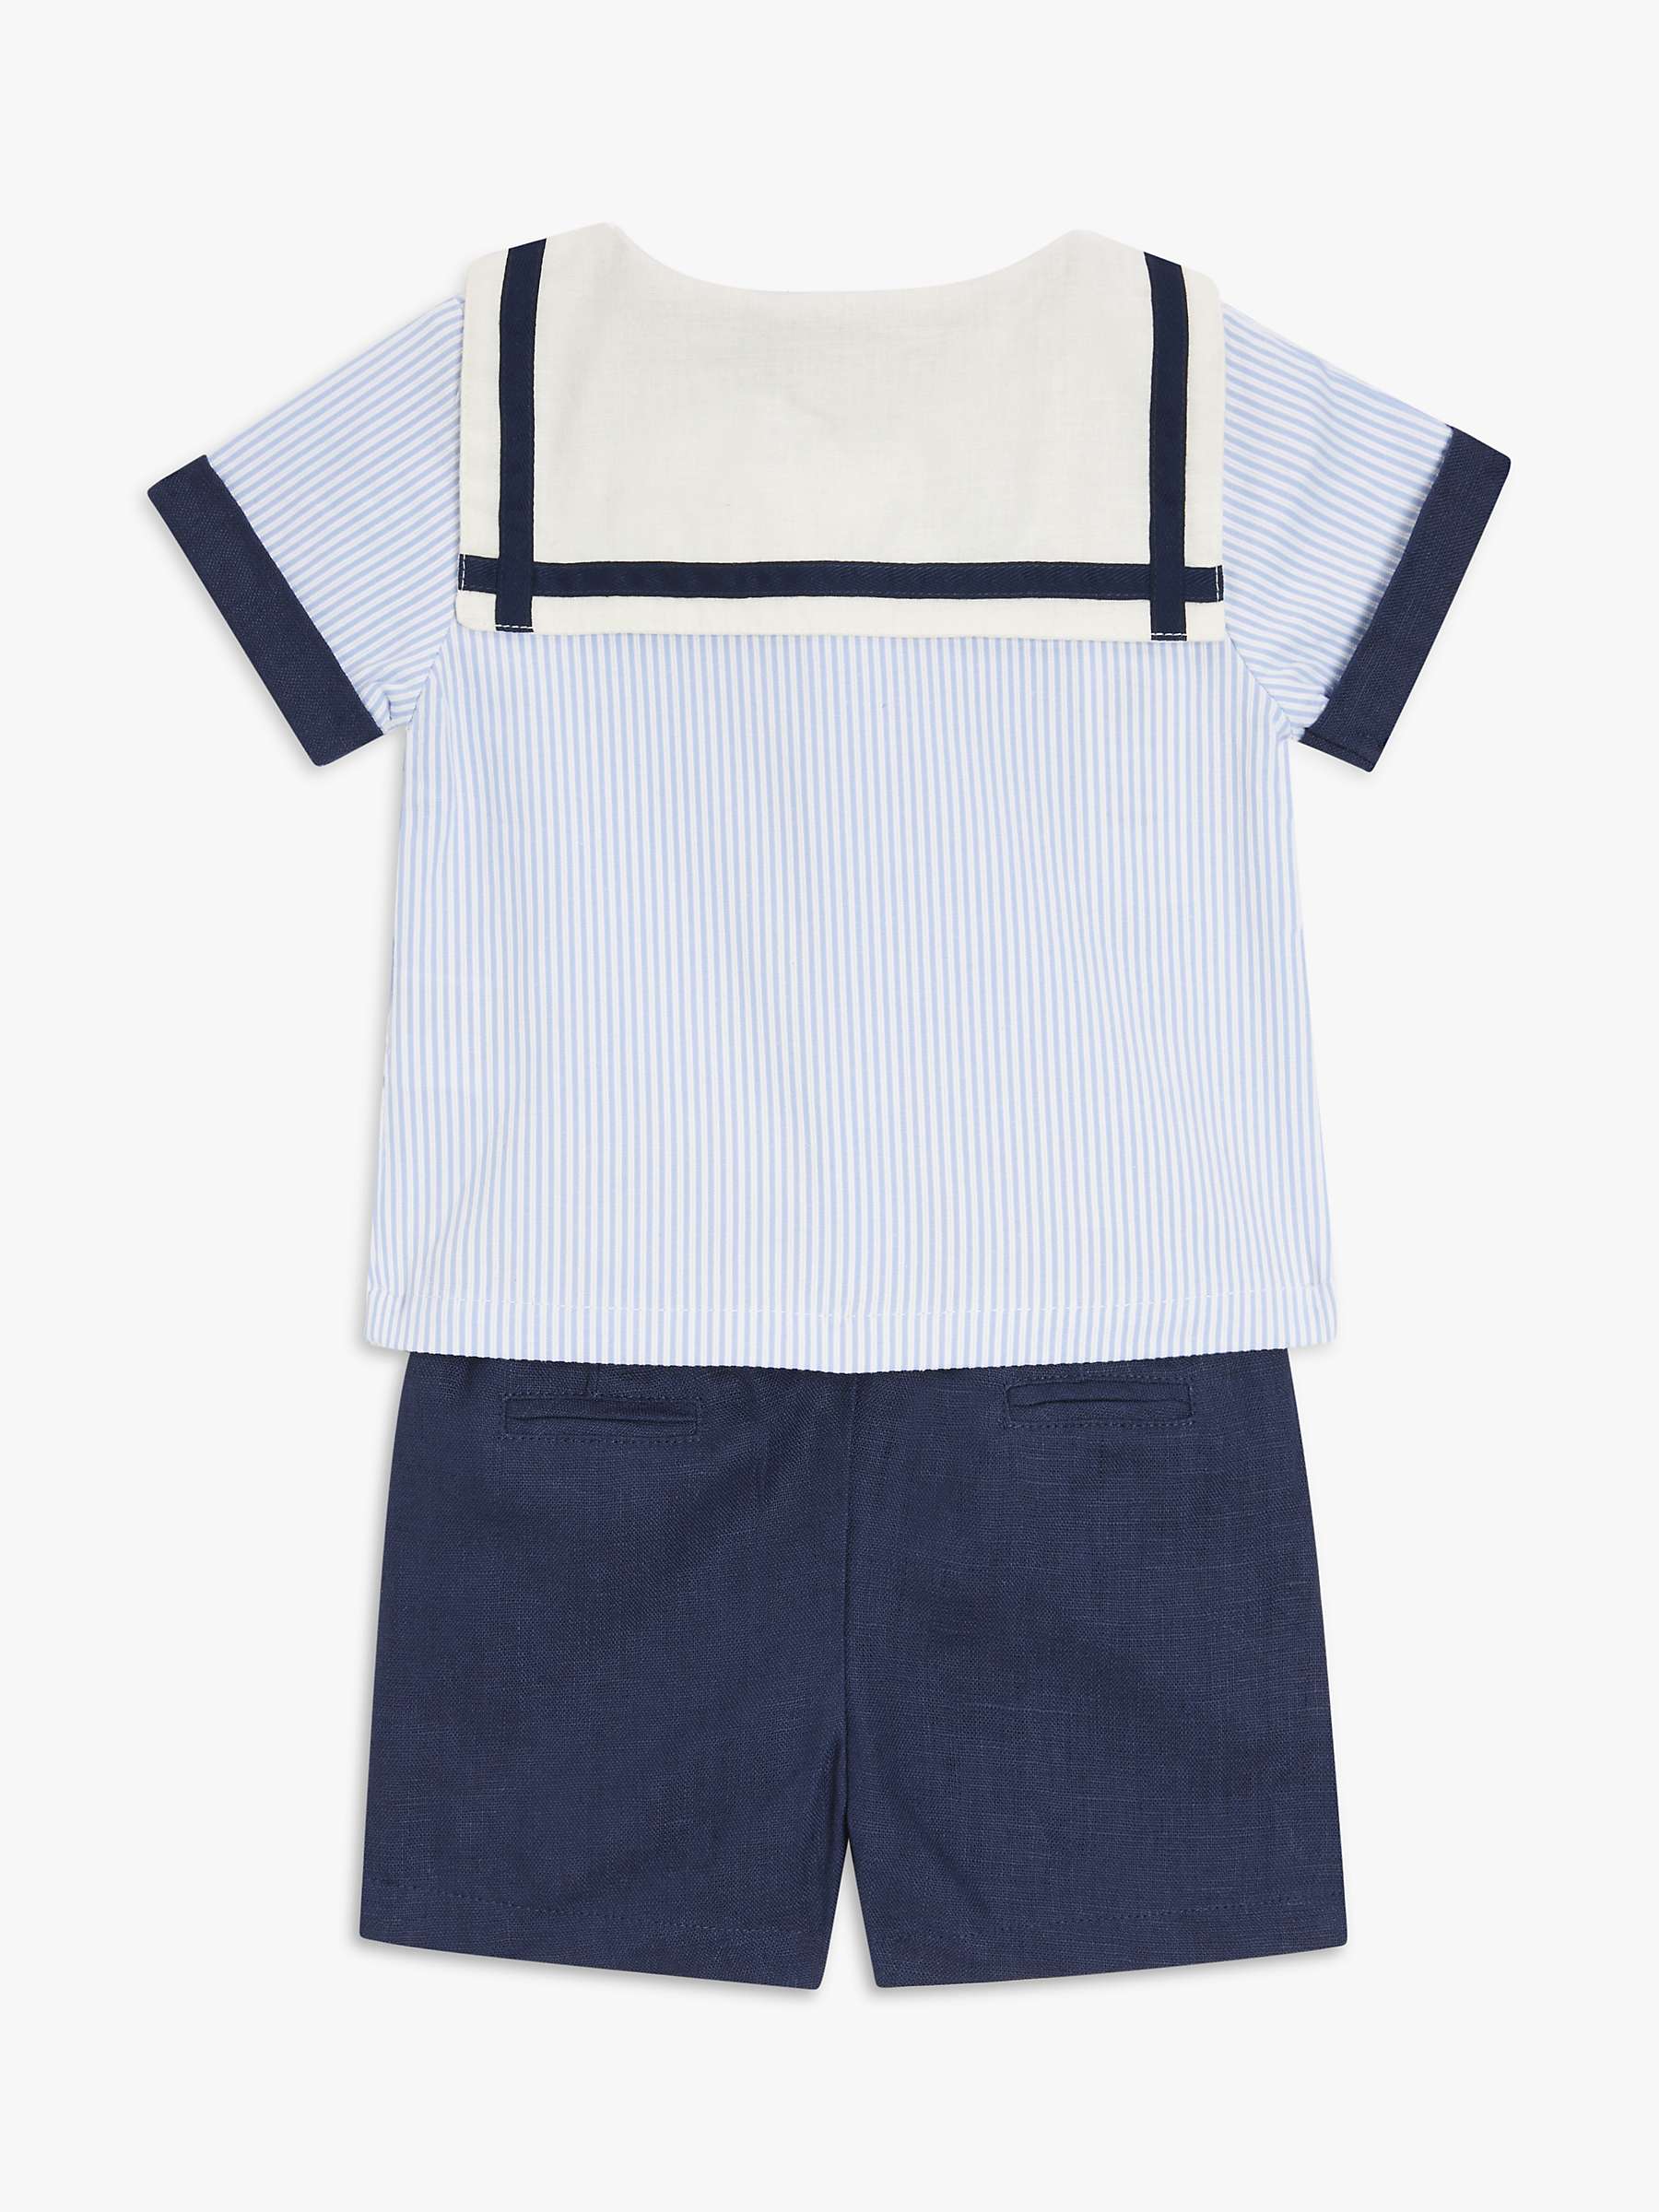 Buy John Lewis Heirloom Collection Baby Sailor Shirt and Shorts Set Online at johnlewis.com